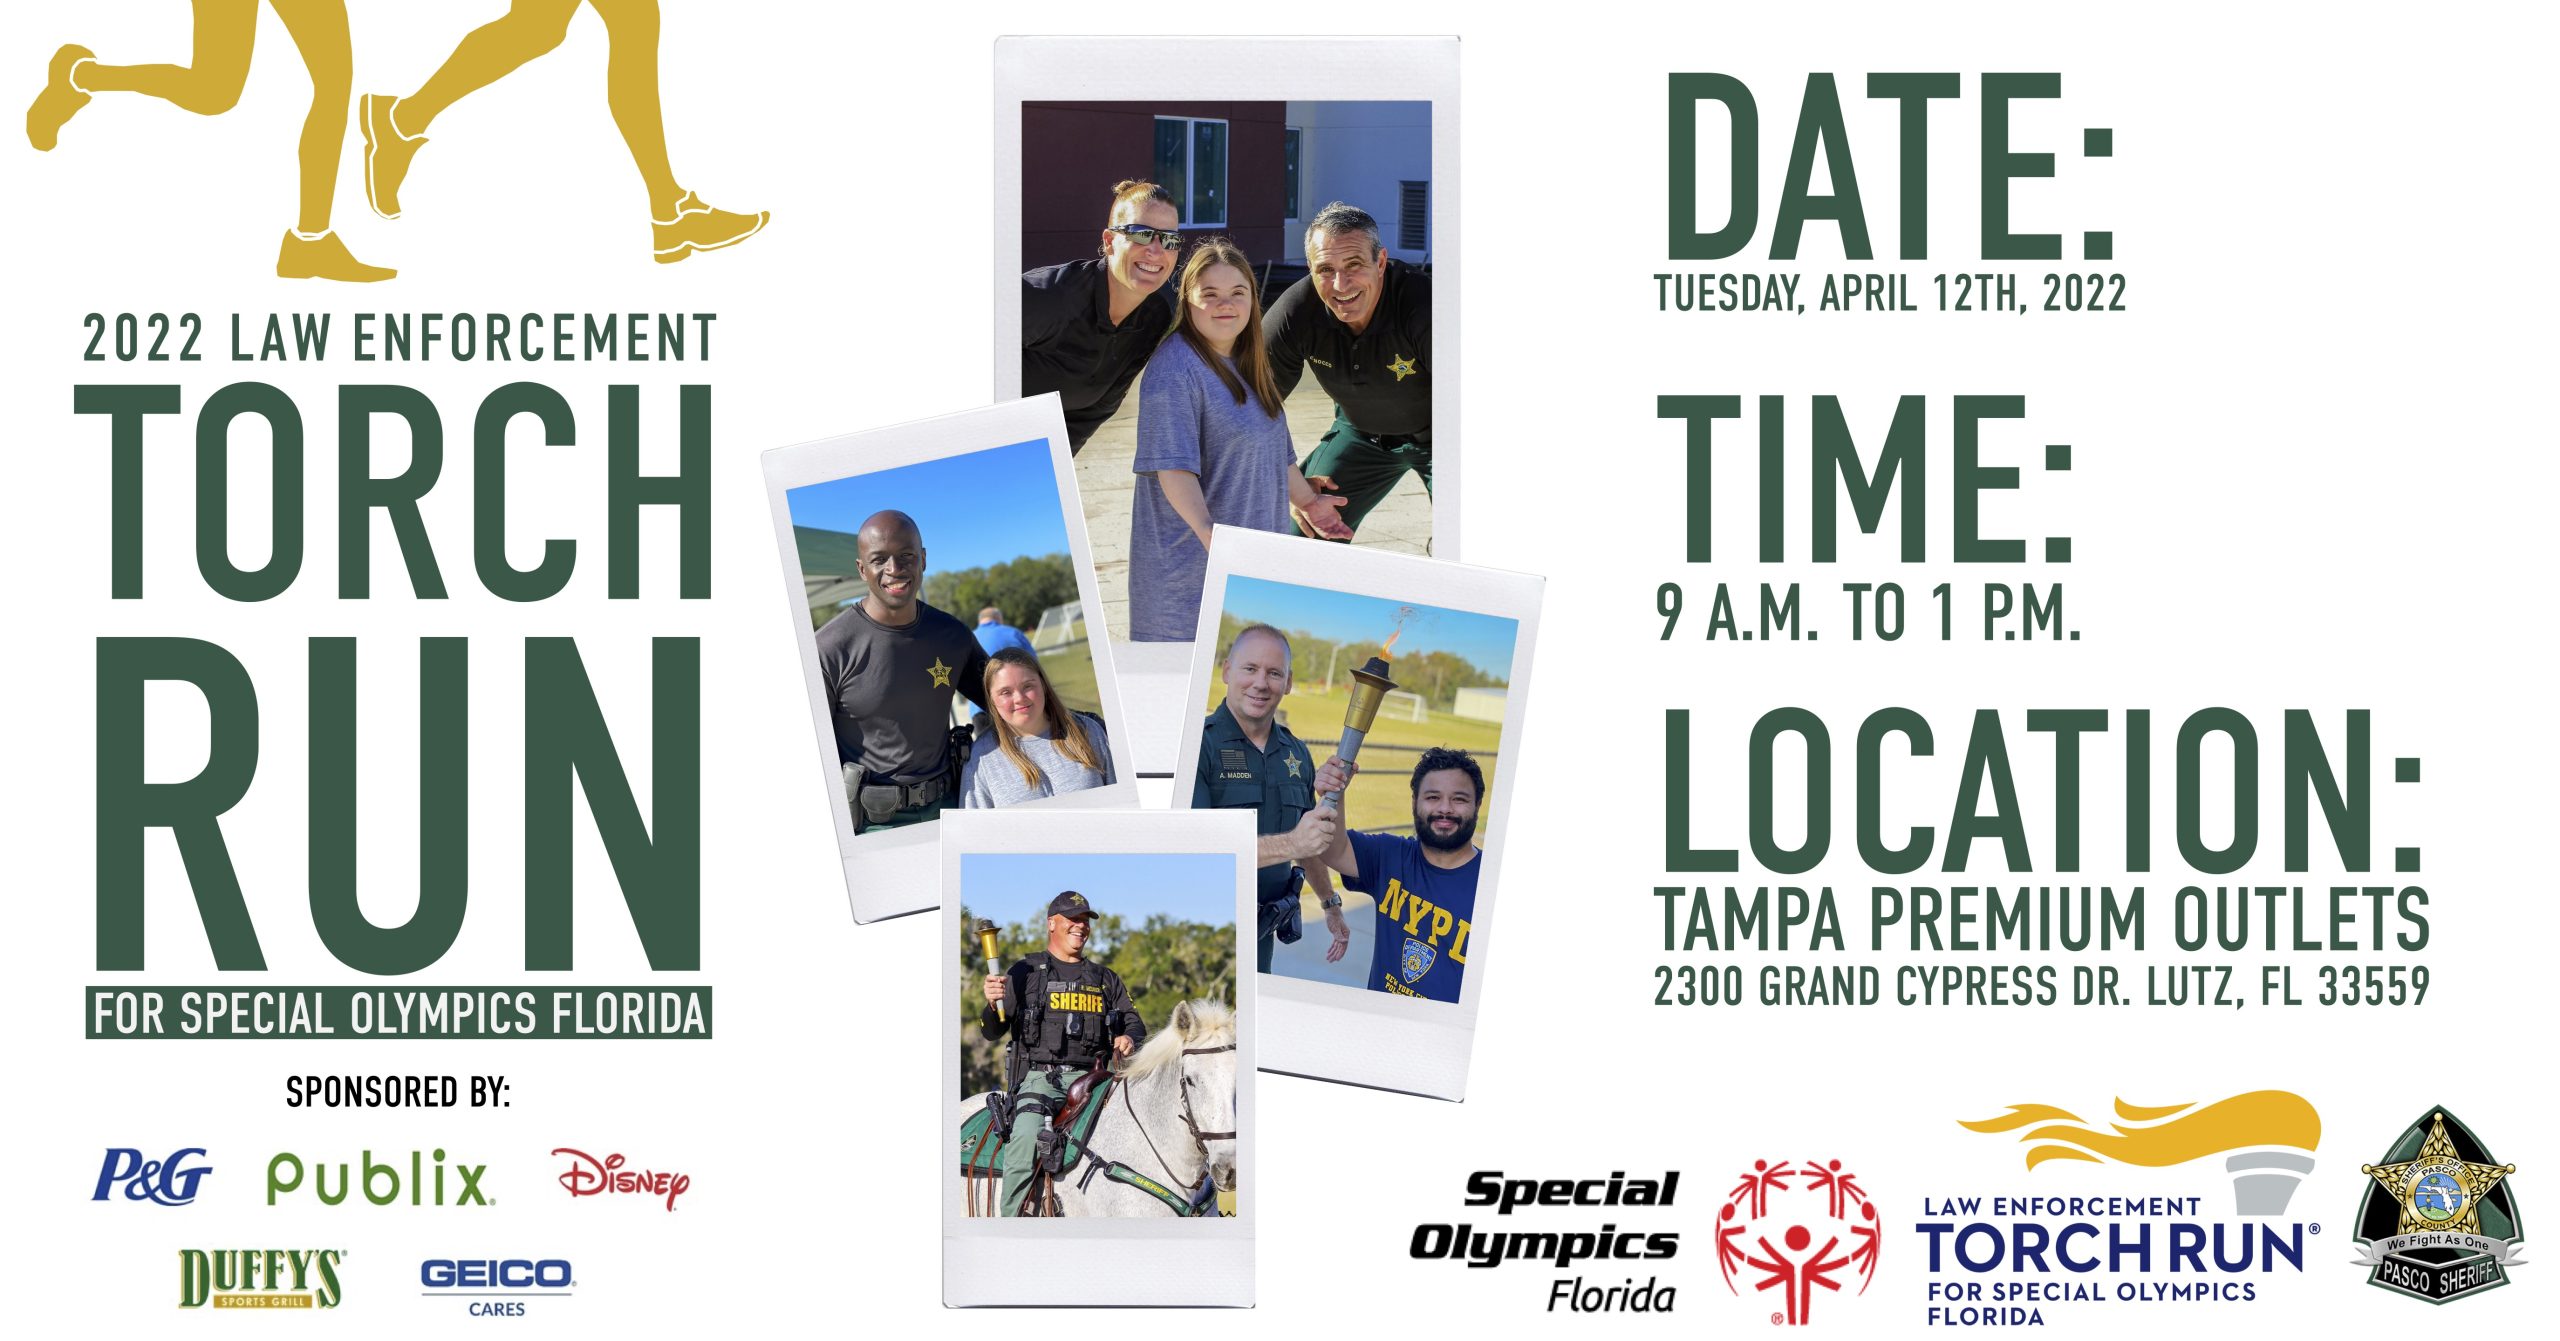 2022 Law Enforcement Torch Run for Special Olympics Florida 04.12.2022